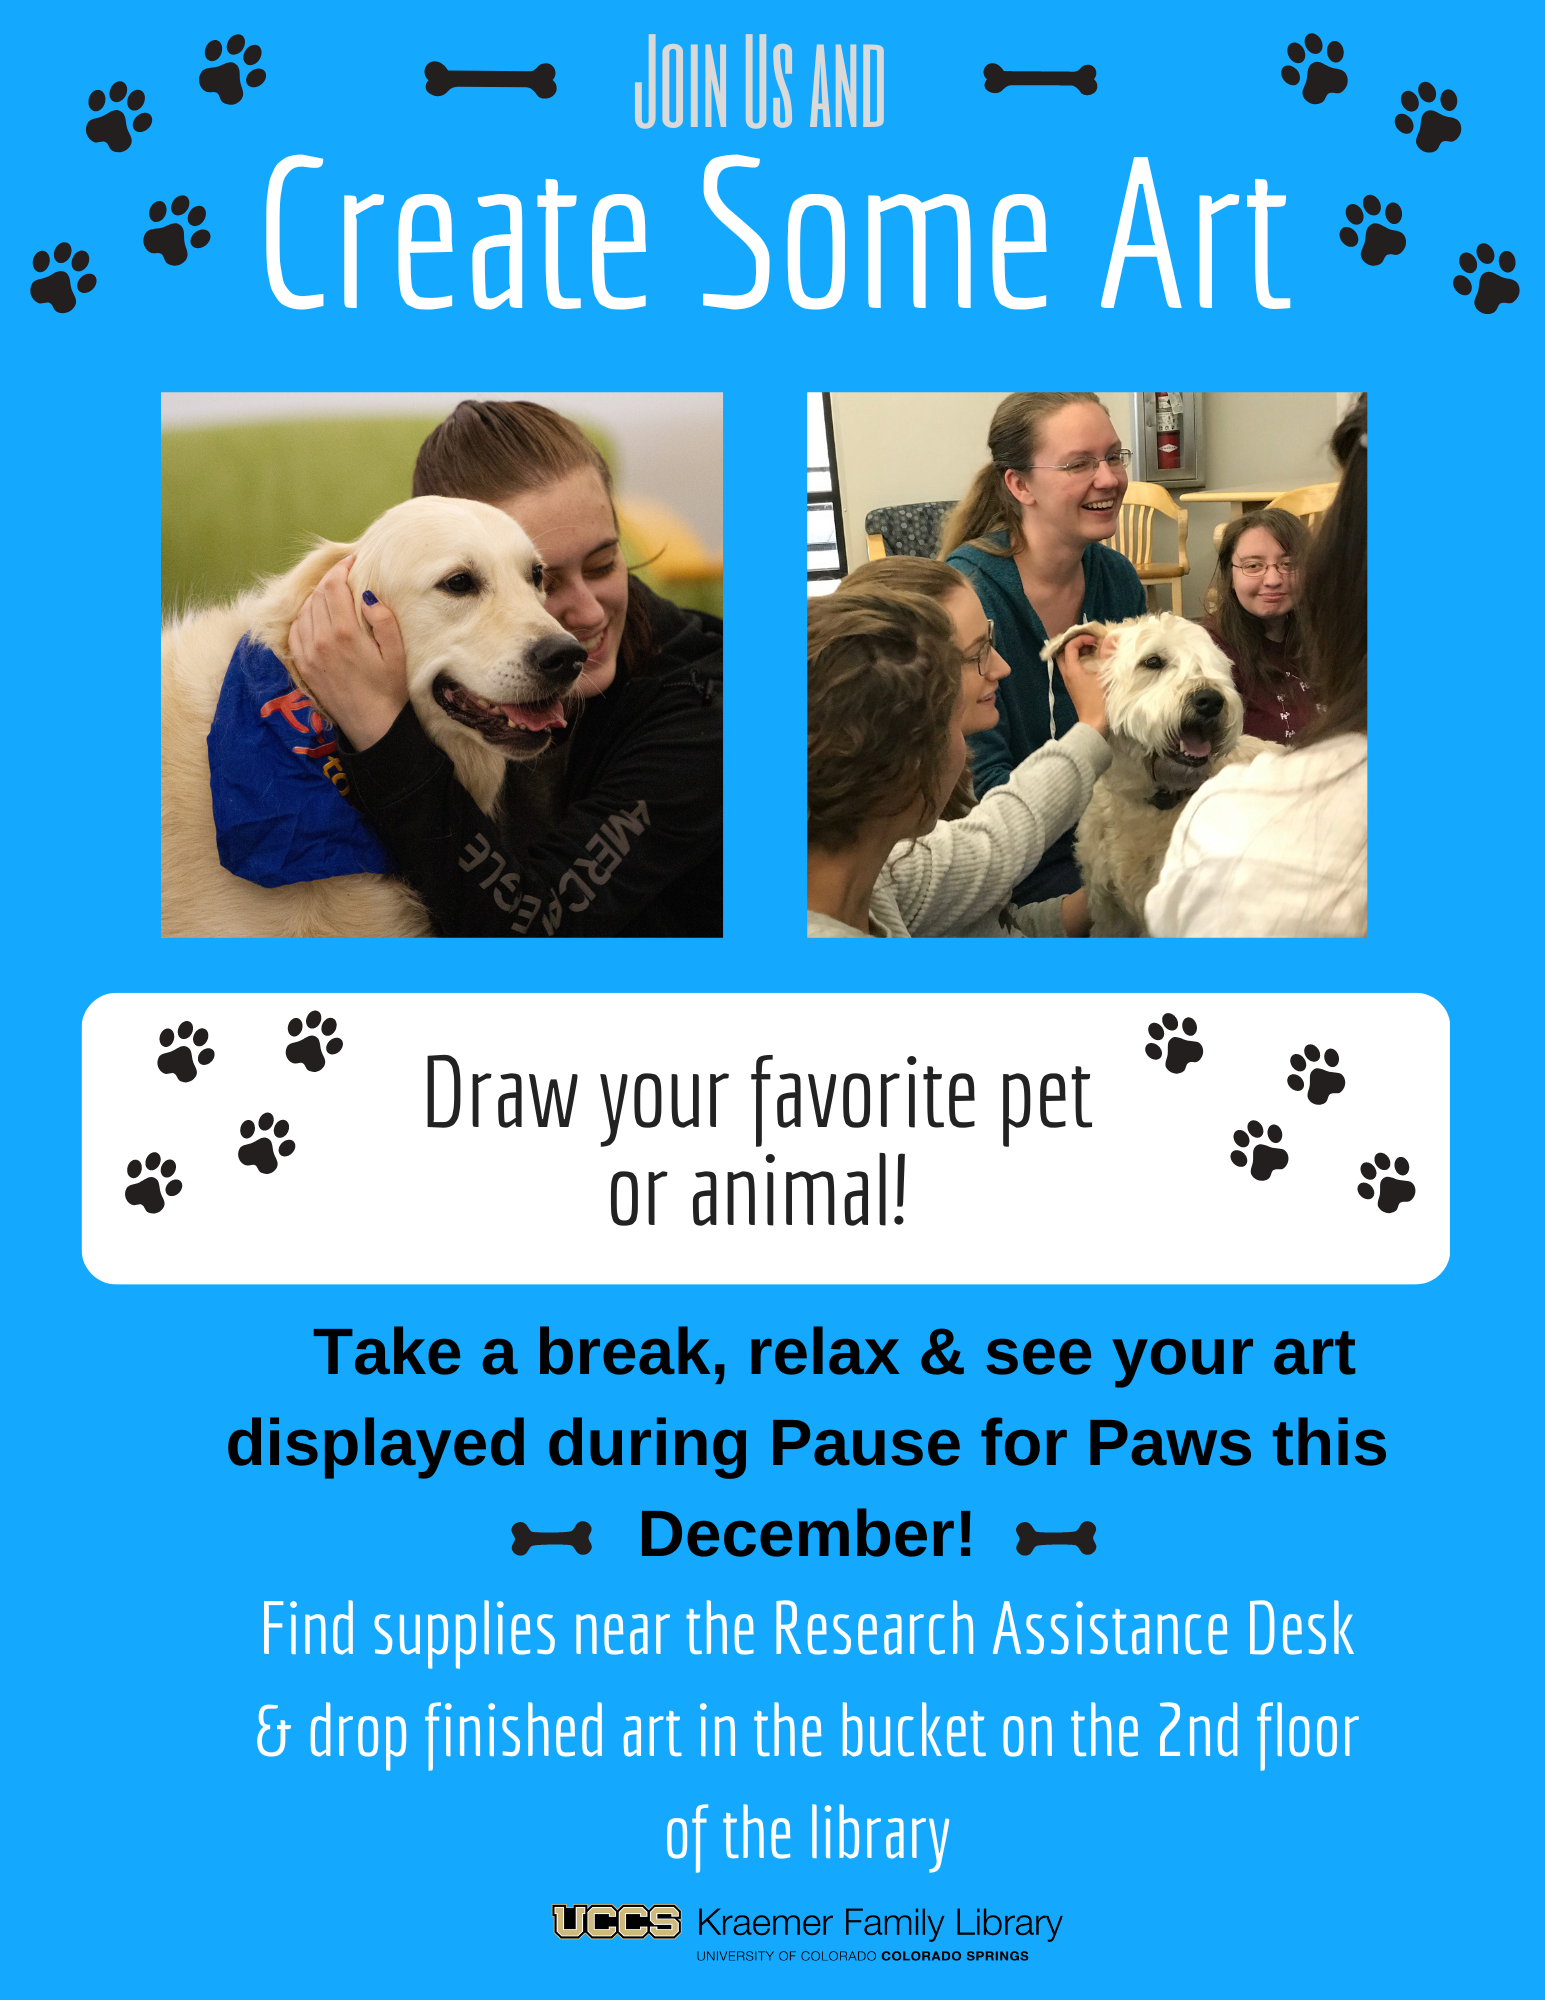 Create art on the 2nd floor of KFL of your pet or any animal to have displayed during Pause for Paws in December 2022. Find supplies near the research assistance desk.